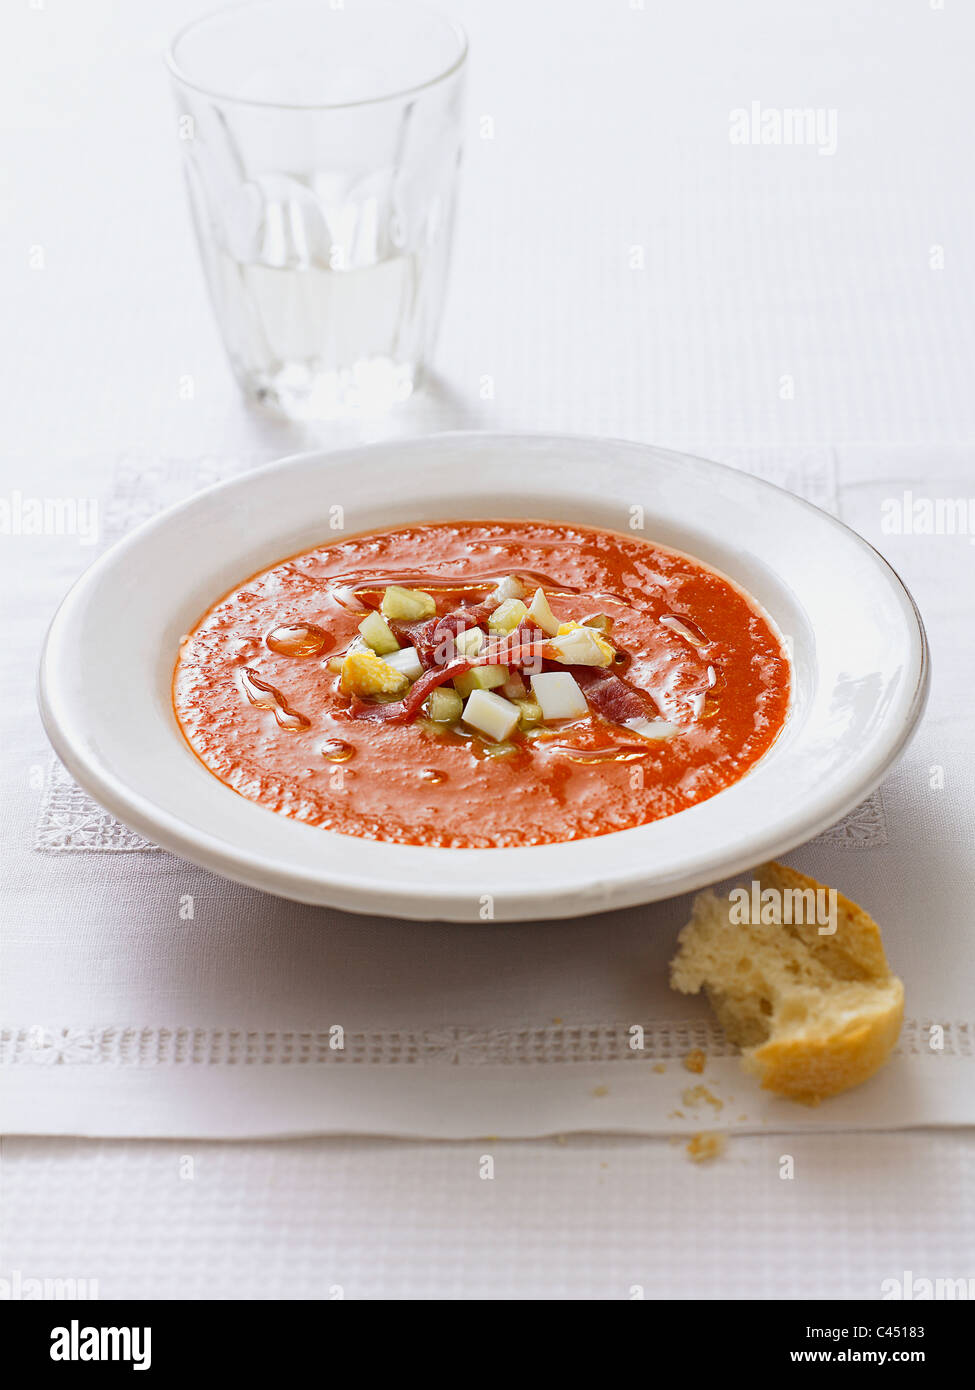 Plate of Andalucian soup Stock Photo